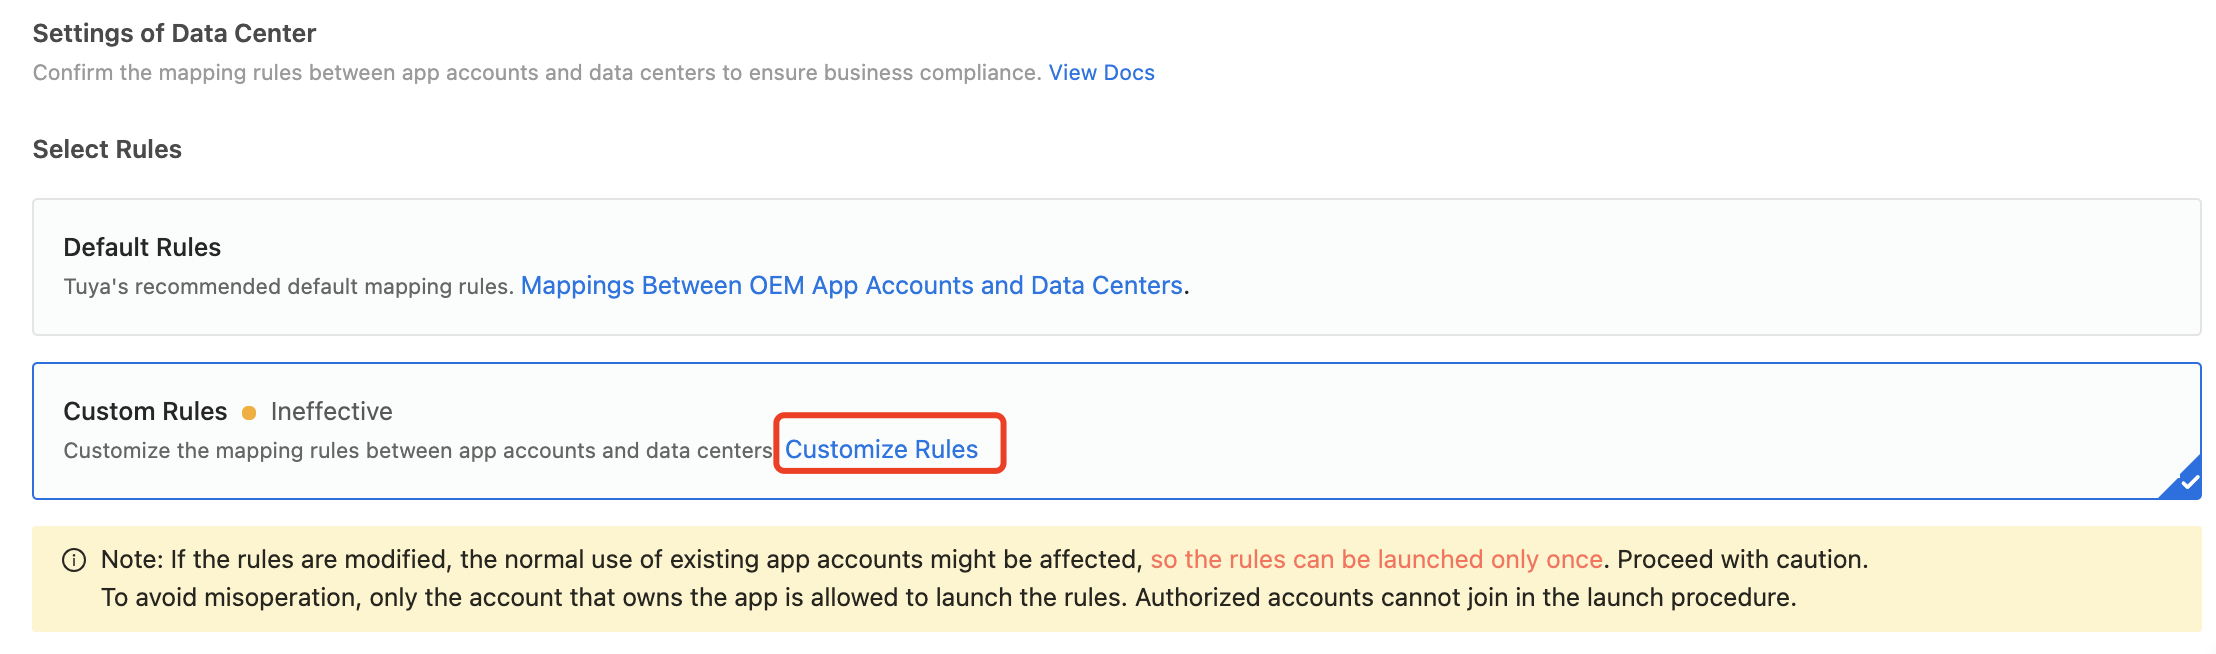 Confirm Mappings Between OEM App Accounts and Data Centers